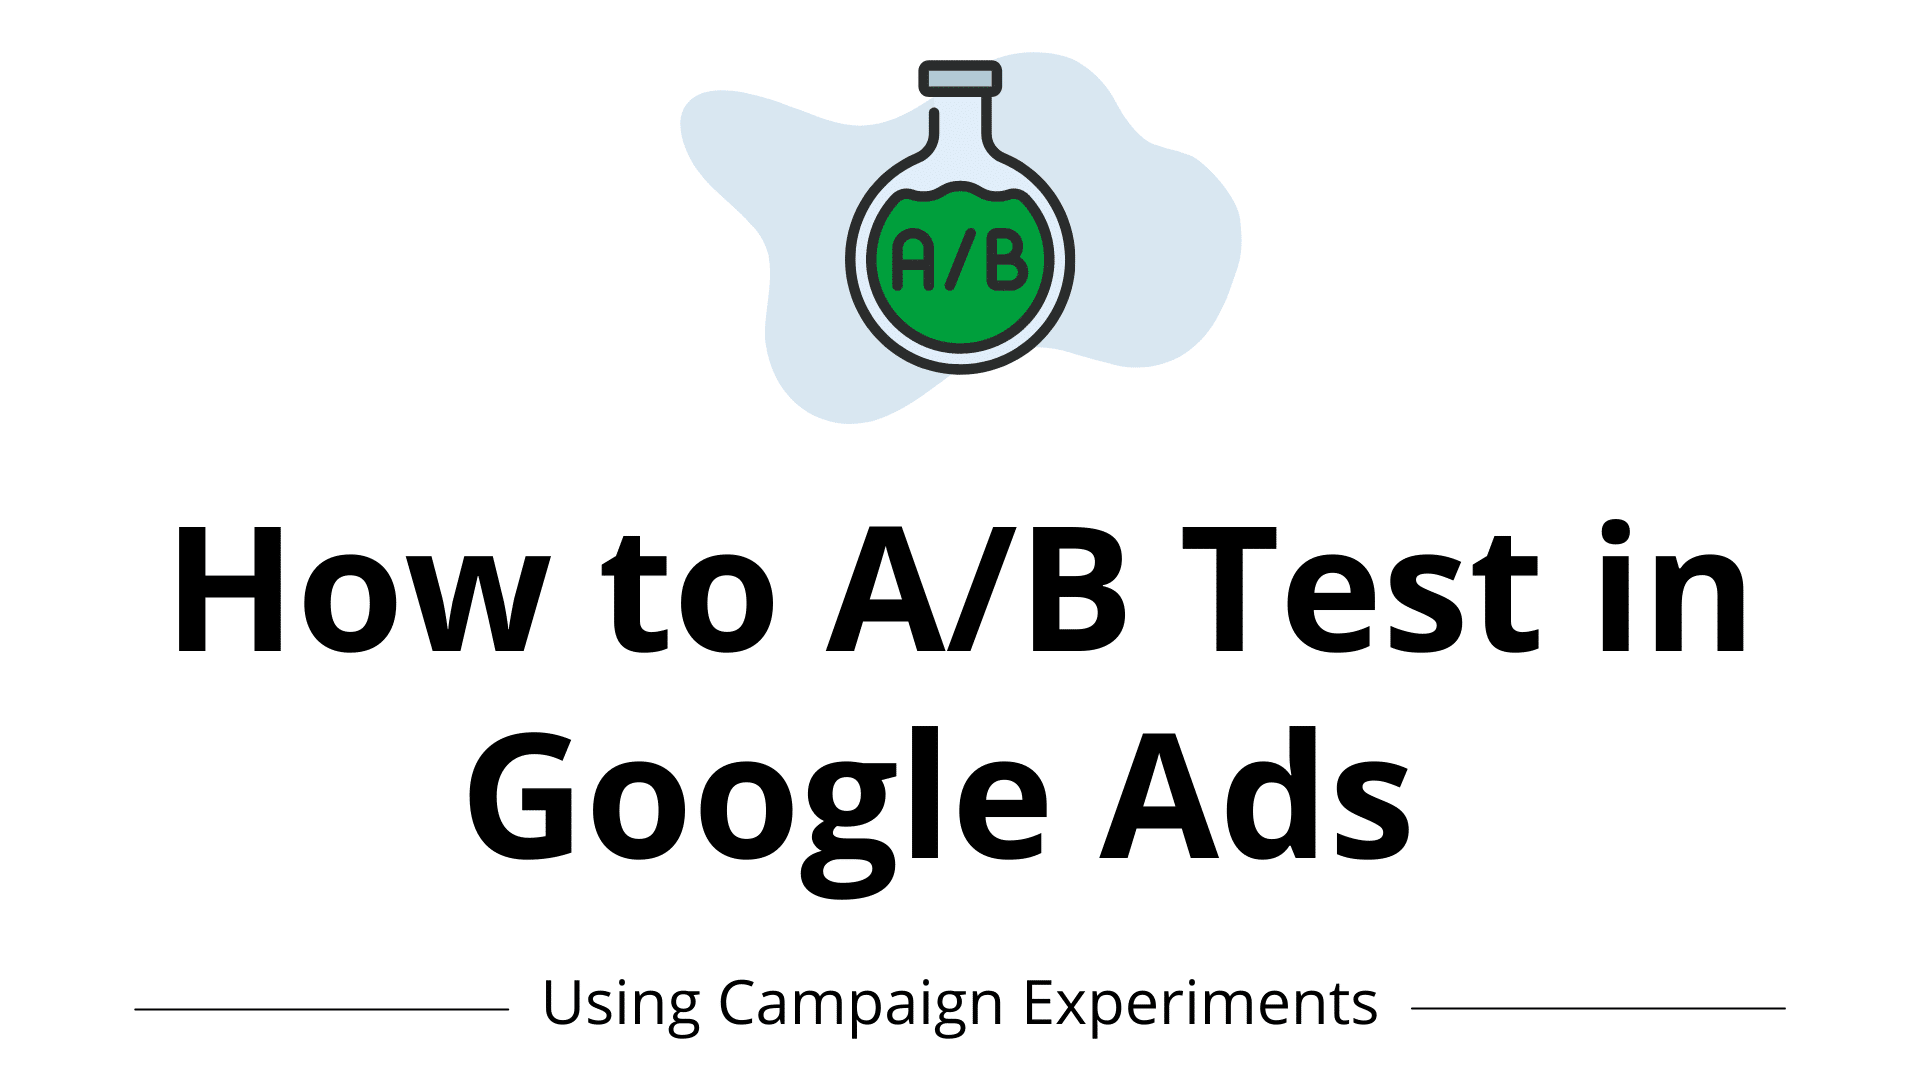 How to A/B test in Google Ads